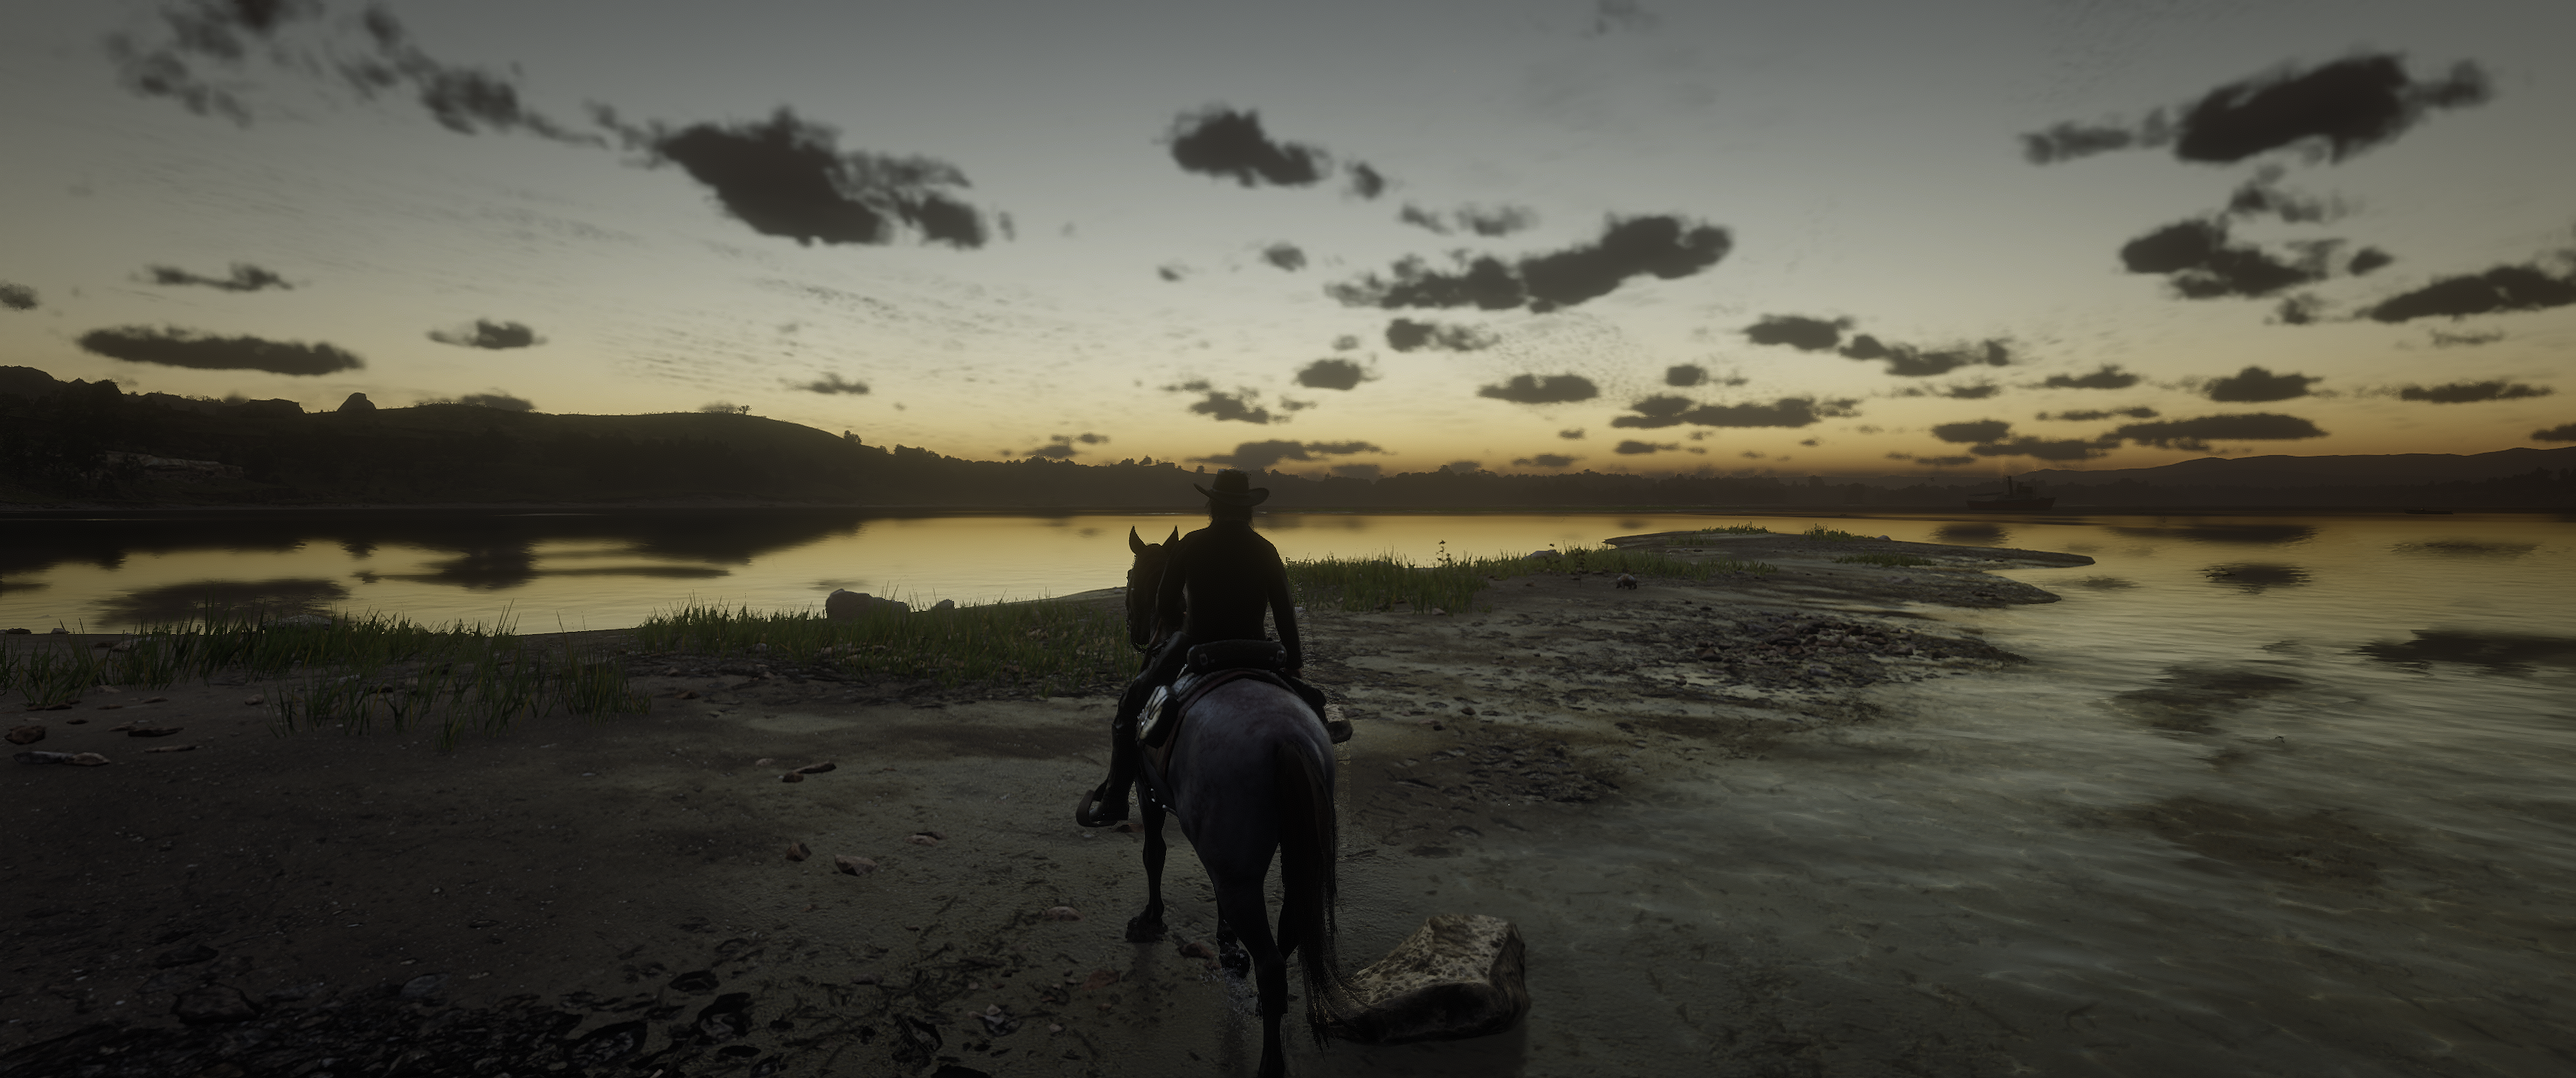 Rock PC Gaming Red Dead Redemption Ol Screen Shot 3440x1440